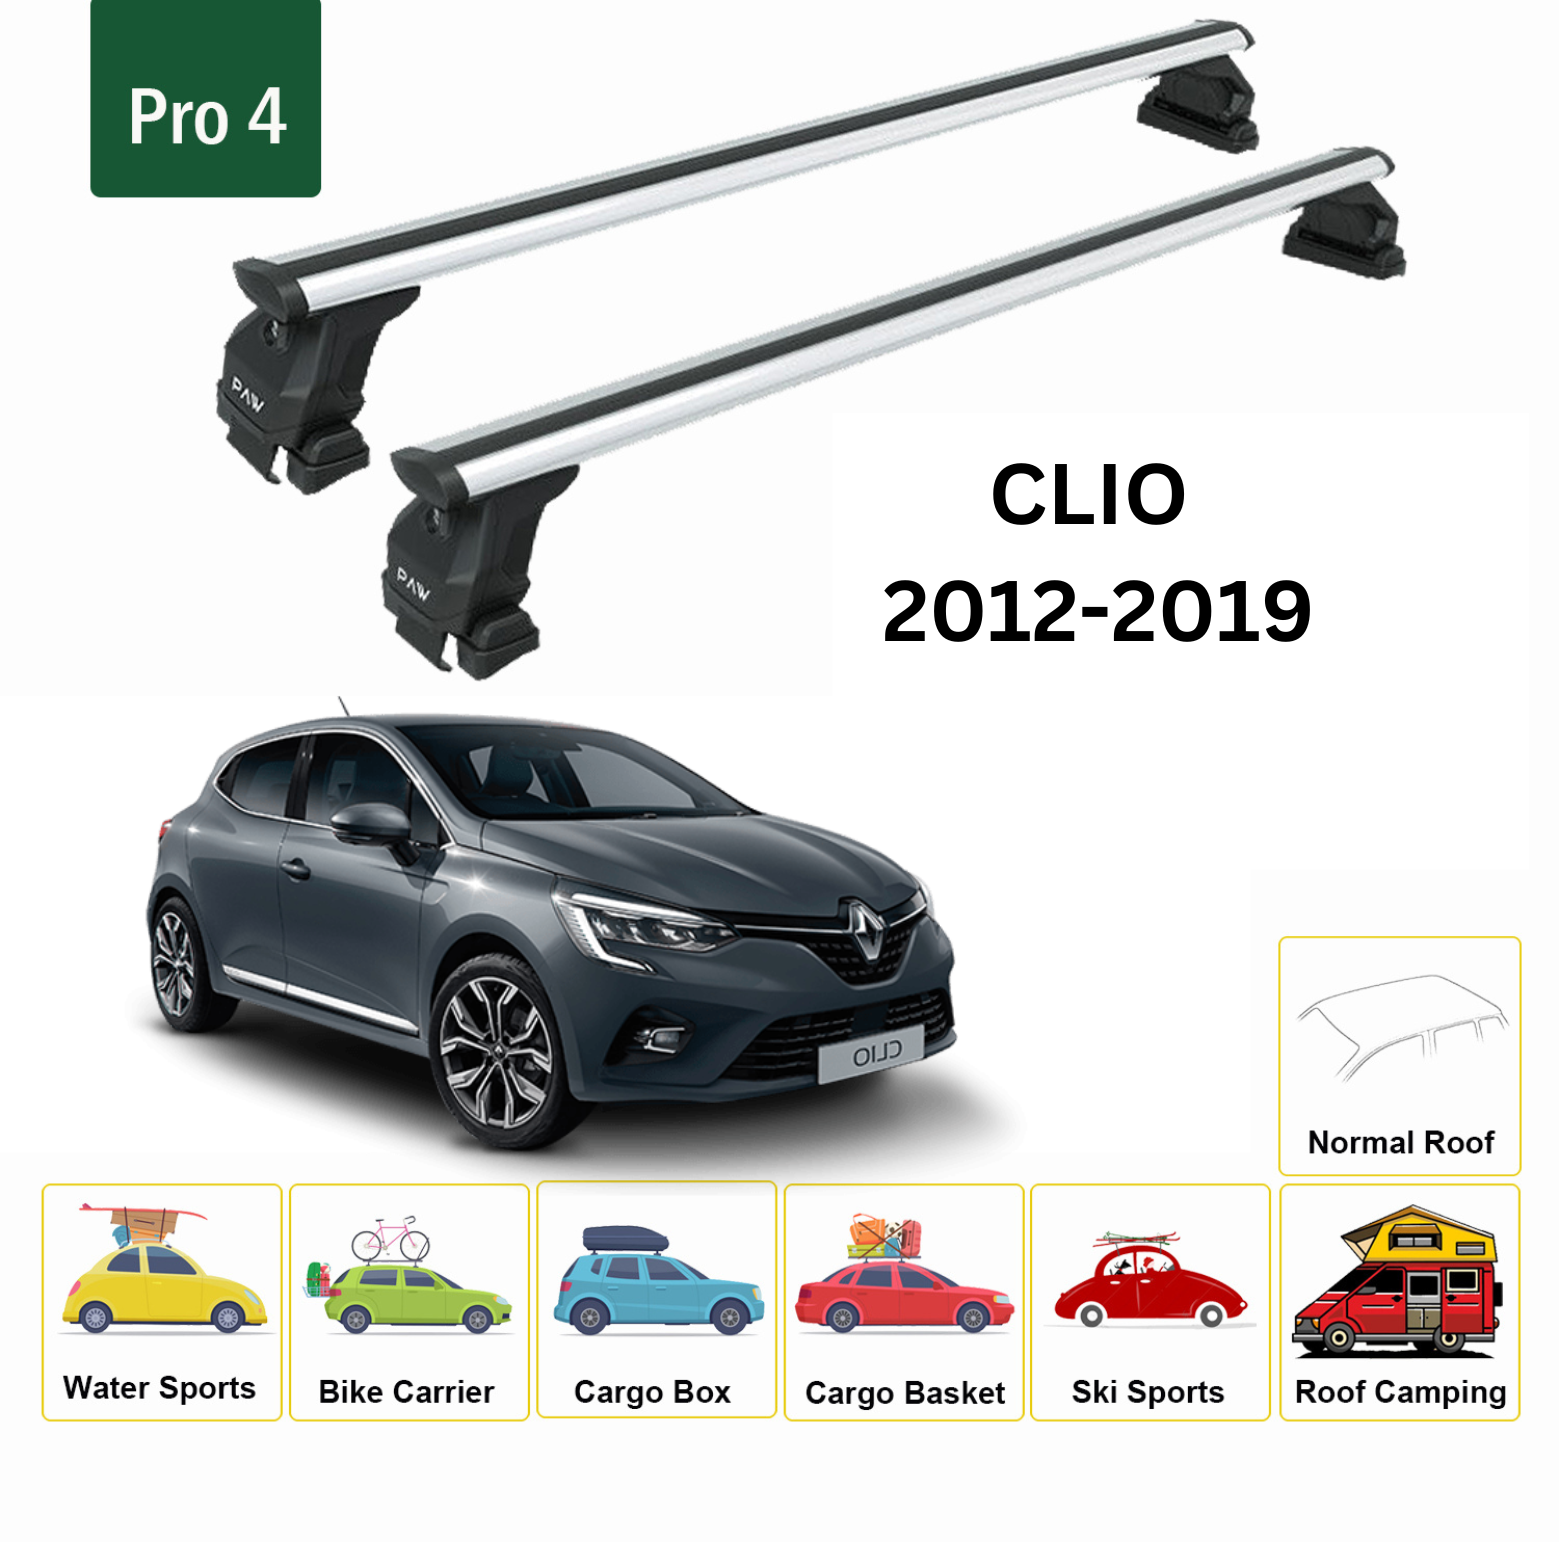 For Renault Clio 2012-2019 Roof Rack System, Aluminium Cross Bar, Metal Bracket, Normal Roof, Silver - 0